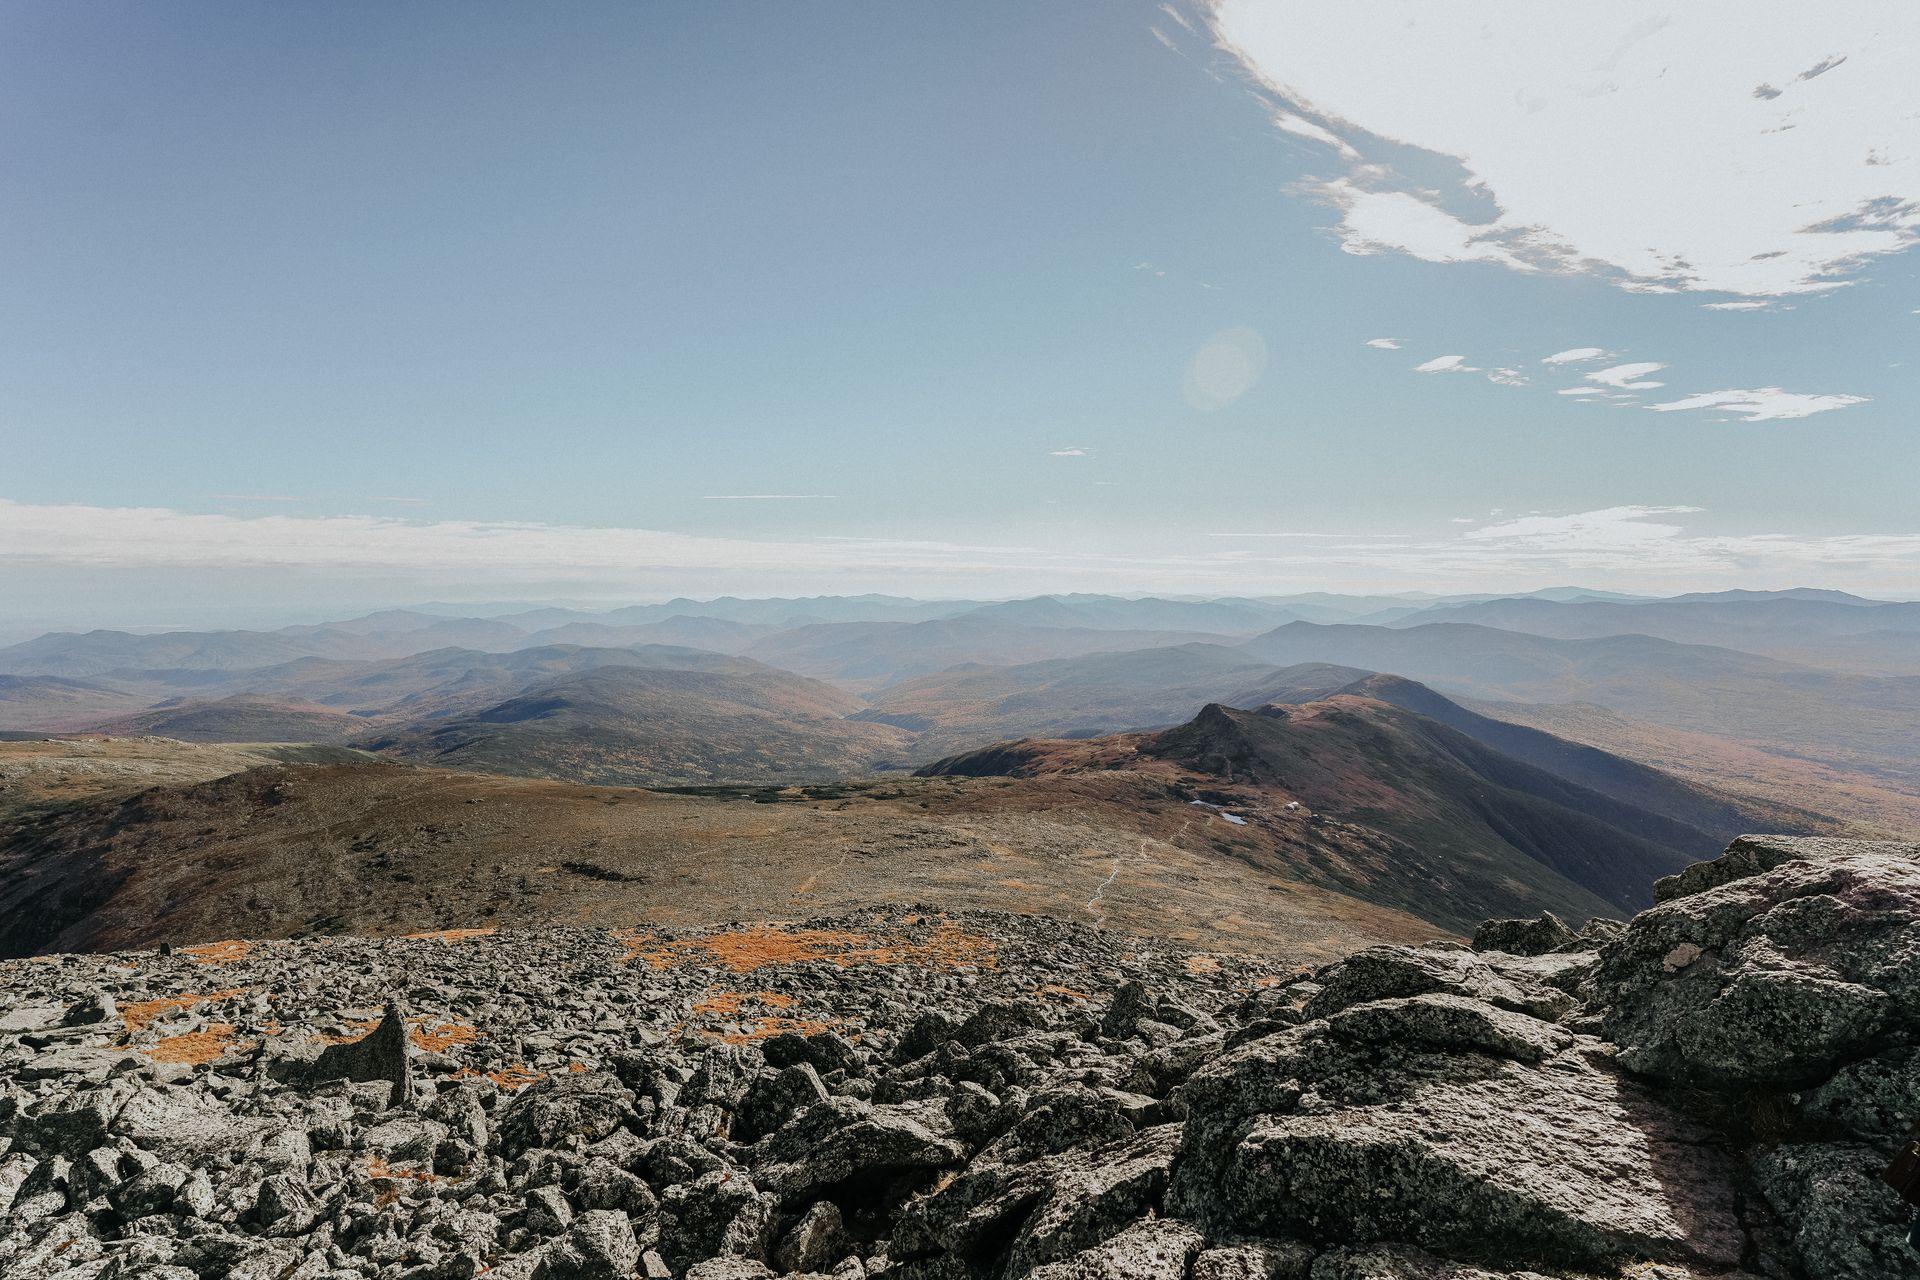 Looking down at an expansive view of mountains from the top of Mt Washington